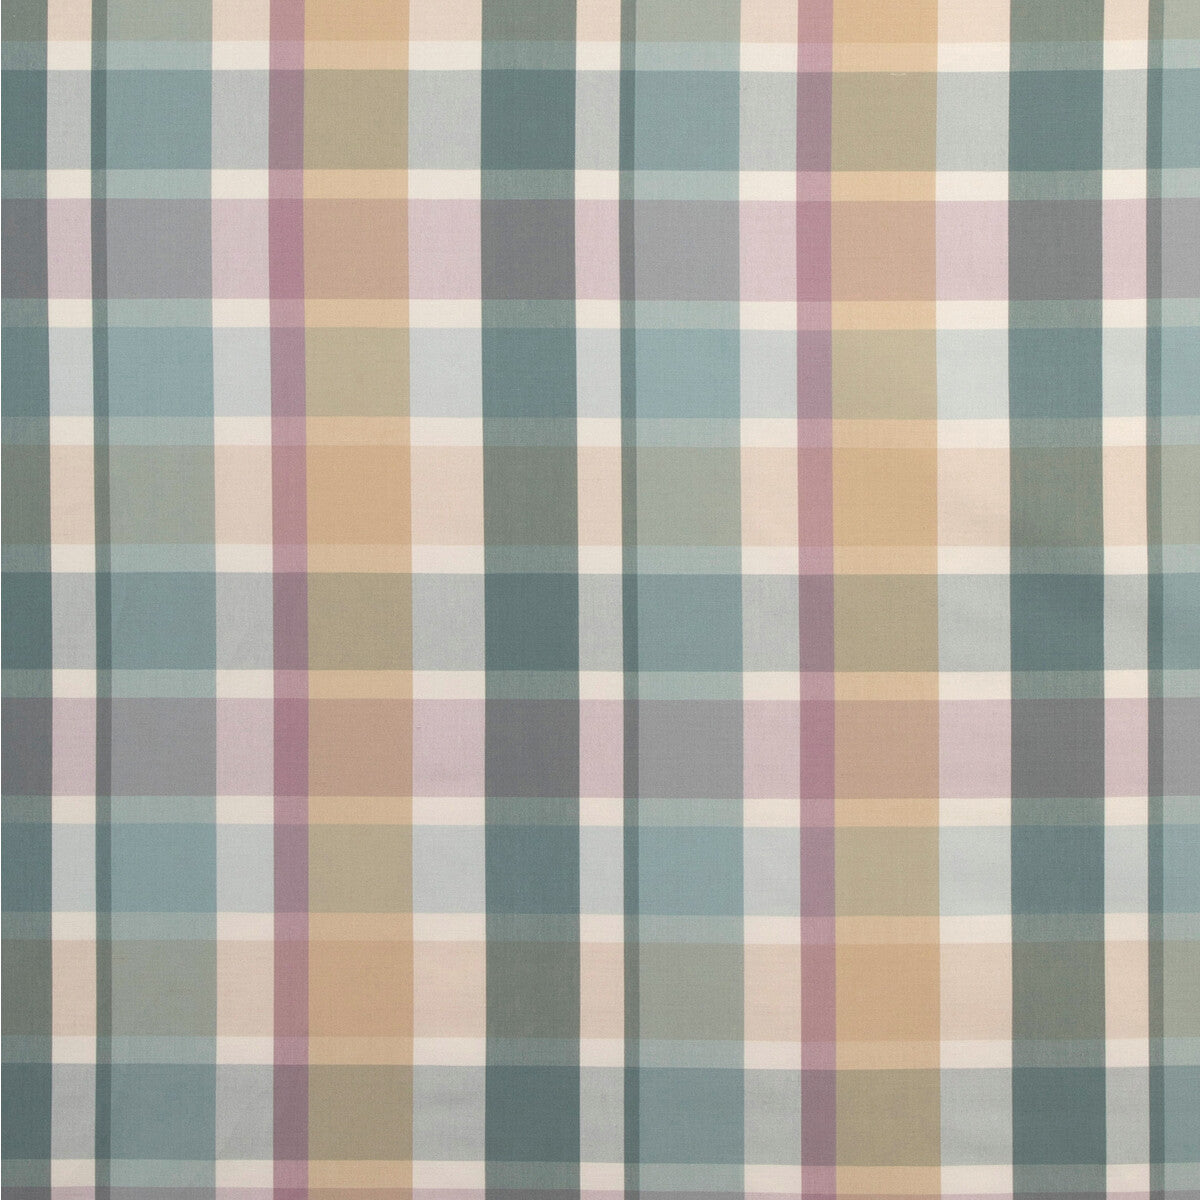 Fisher Plaid fabric in lake/sand color - pattern 2023107.1613.0 - by Lee Jofa in the Highfield Stripes And Plaids collection